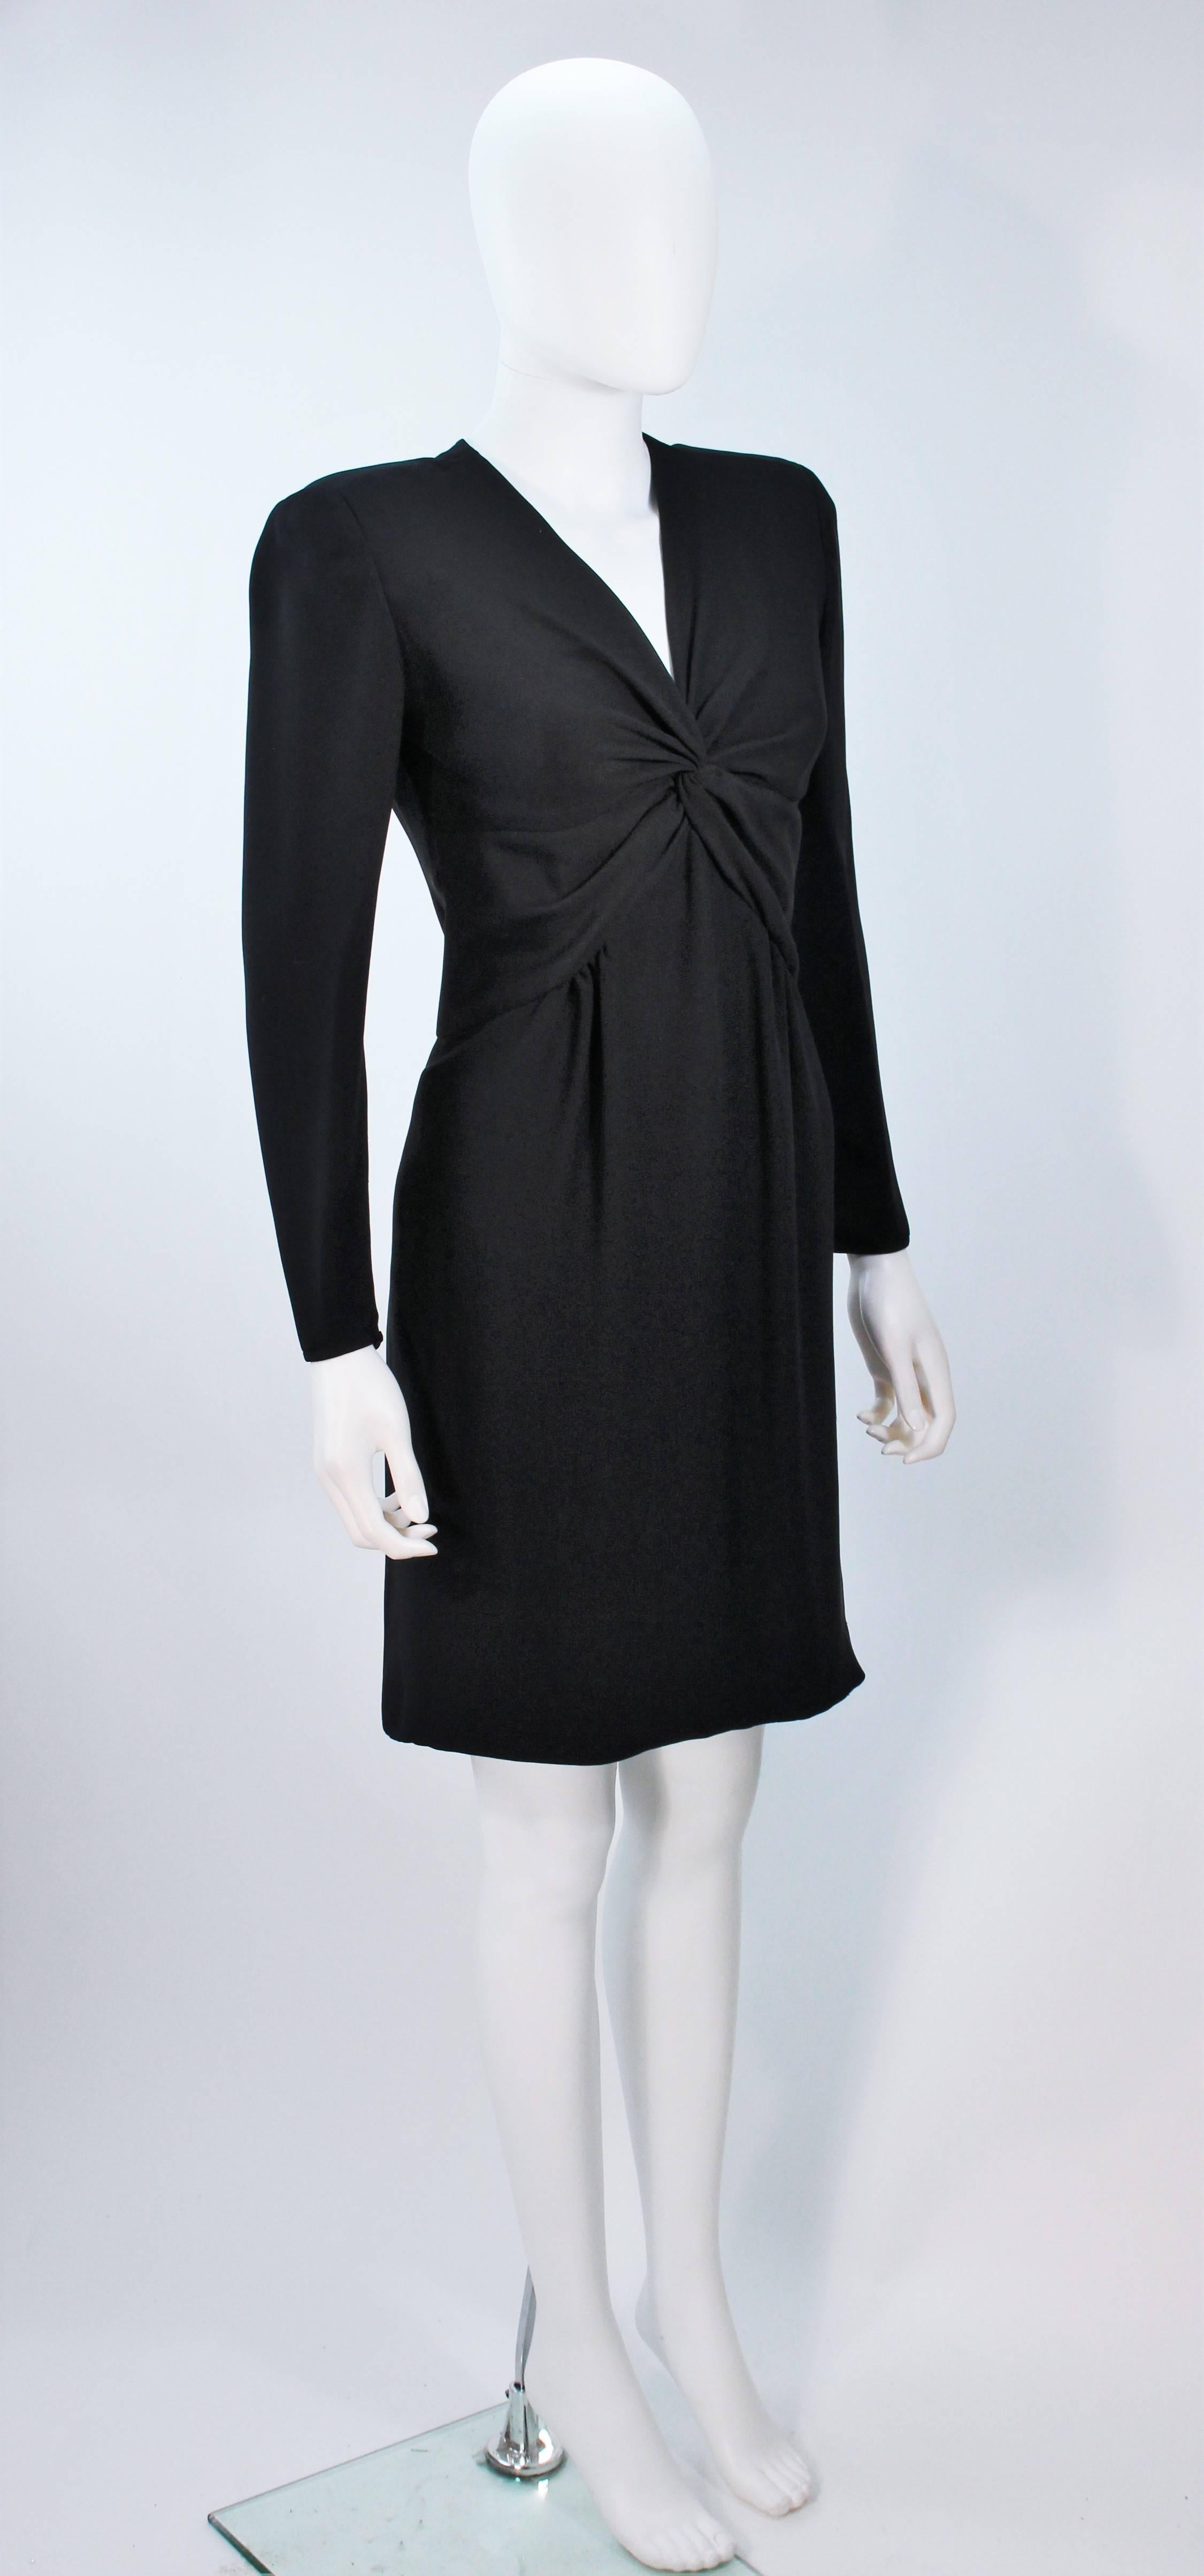  This Valentino dress is composed of a twist front design in black. There is a center back zipper closure. In excellent vintage condition. 

**Please cross-reference measurements for personal accuracy. Size in description box is an